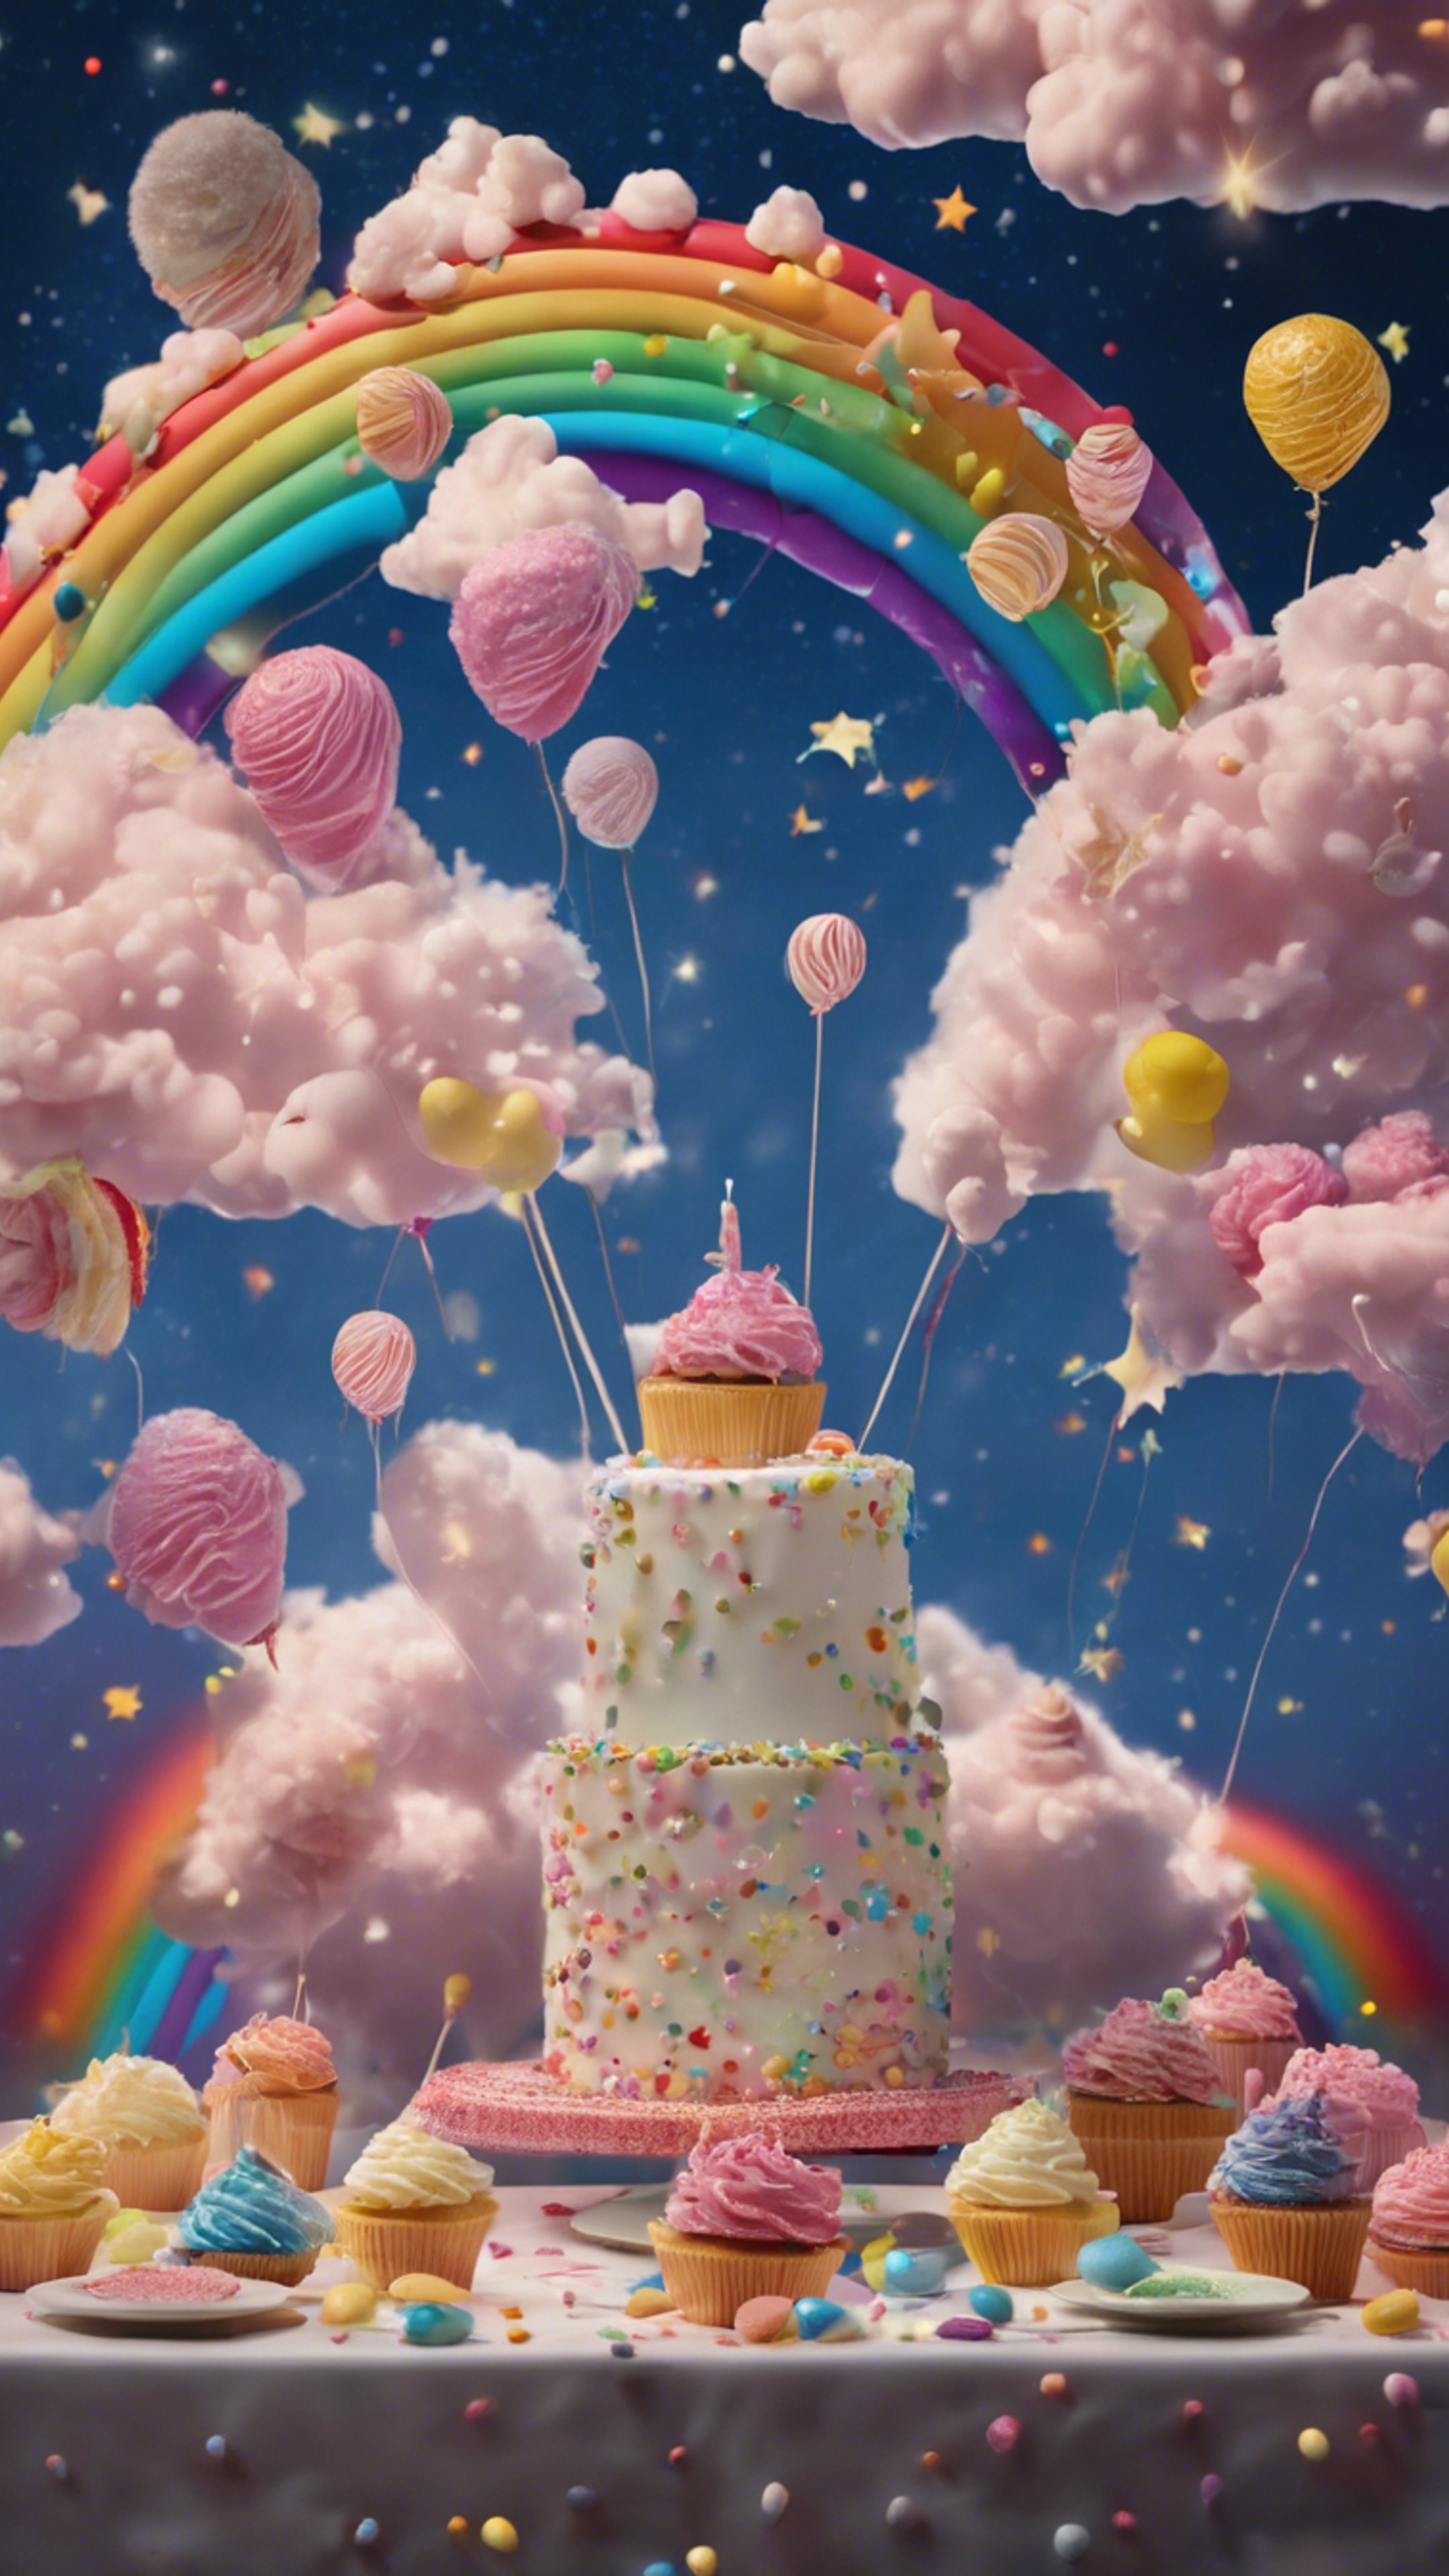 Surreal representation of a birthday party with floating cakes, candies amid fluffy clouds and rainbows discordantly juxtaposed against a starry night sky. Tapeta[7f18c2fd7760424e83fc]